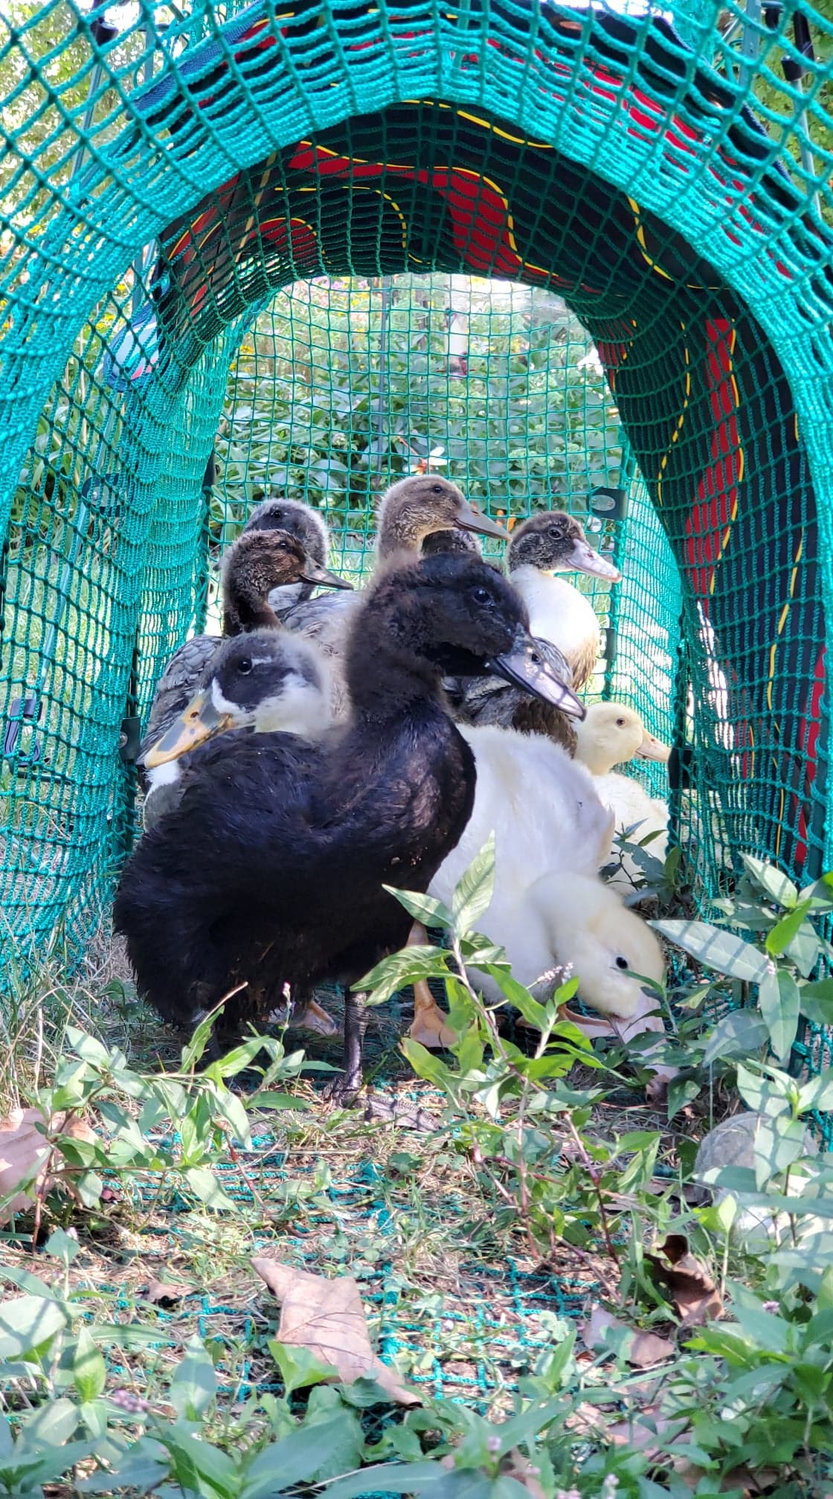 More than 100 domestic ducks were rescued in the Town of Hempstead last year, including about 75 in Baldwin. Most pictured above were rescued from Baldwin Harbor.